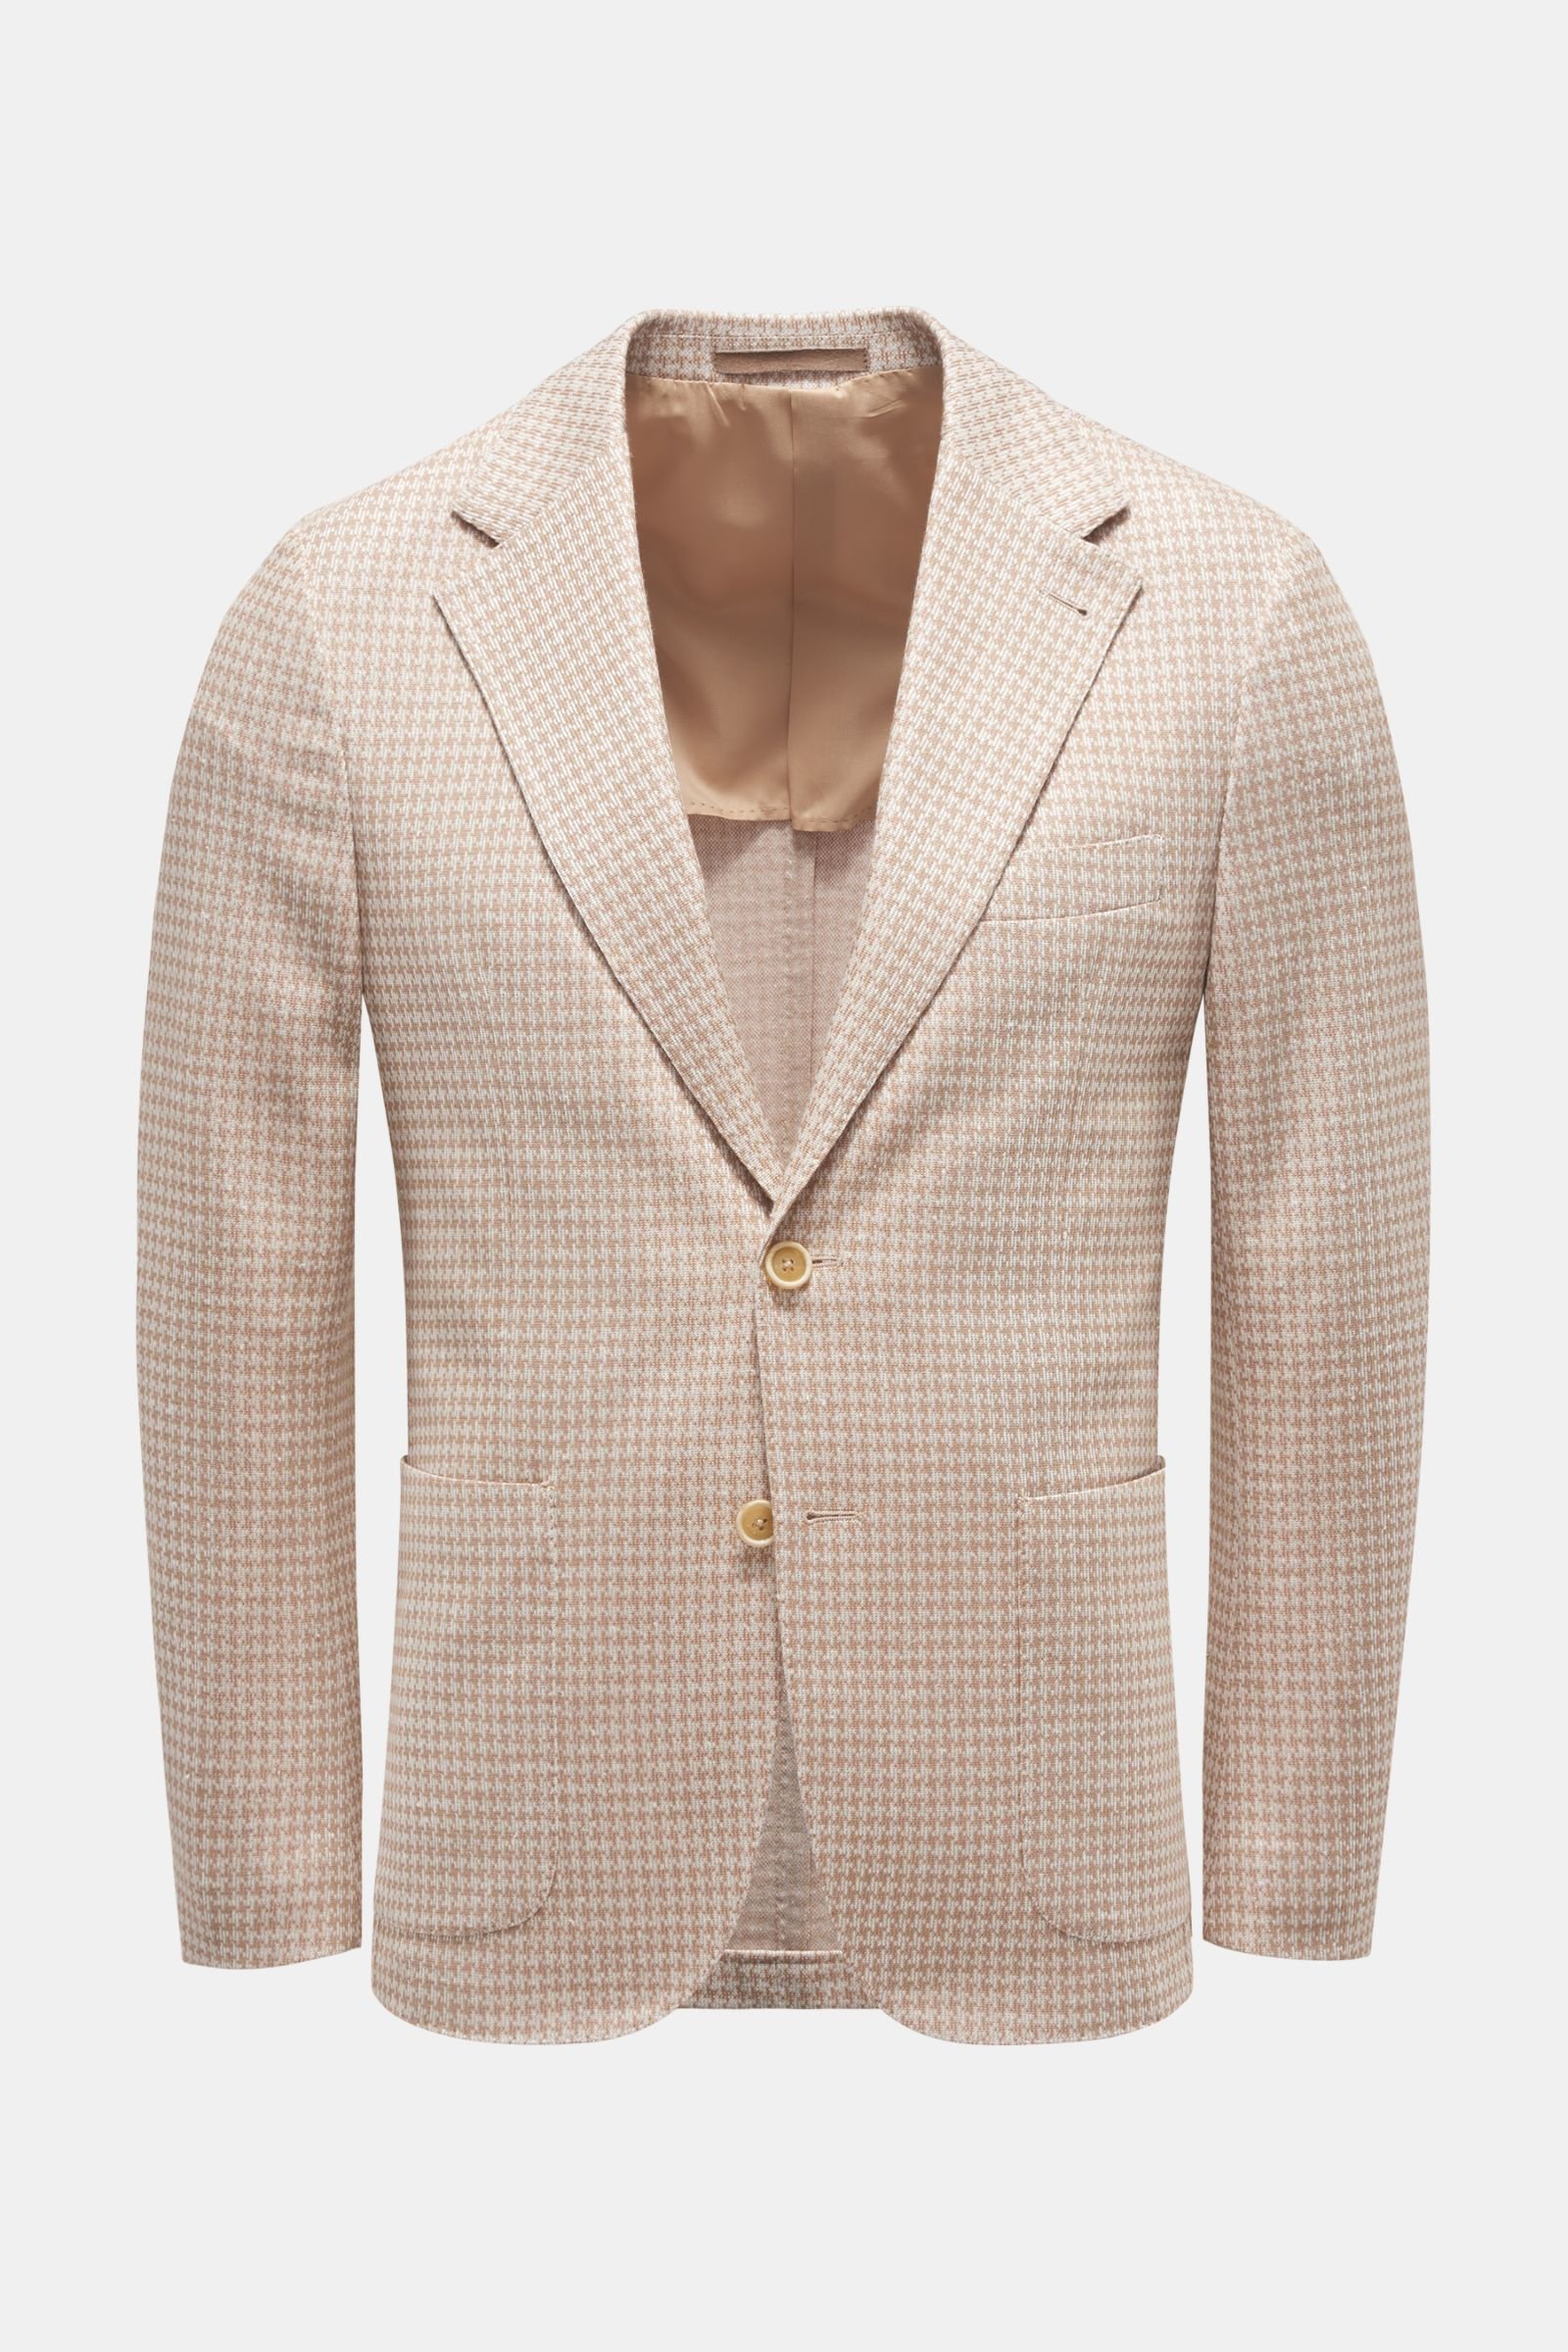 Smart-casual jacket light brown/white checked